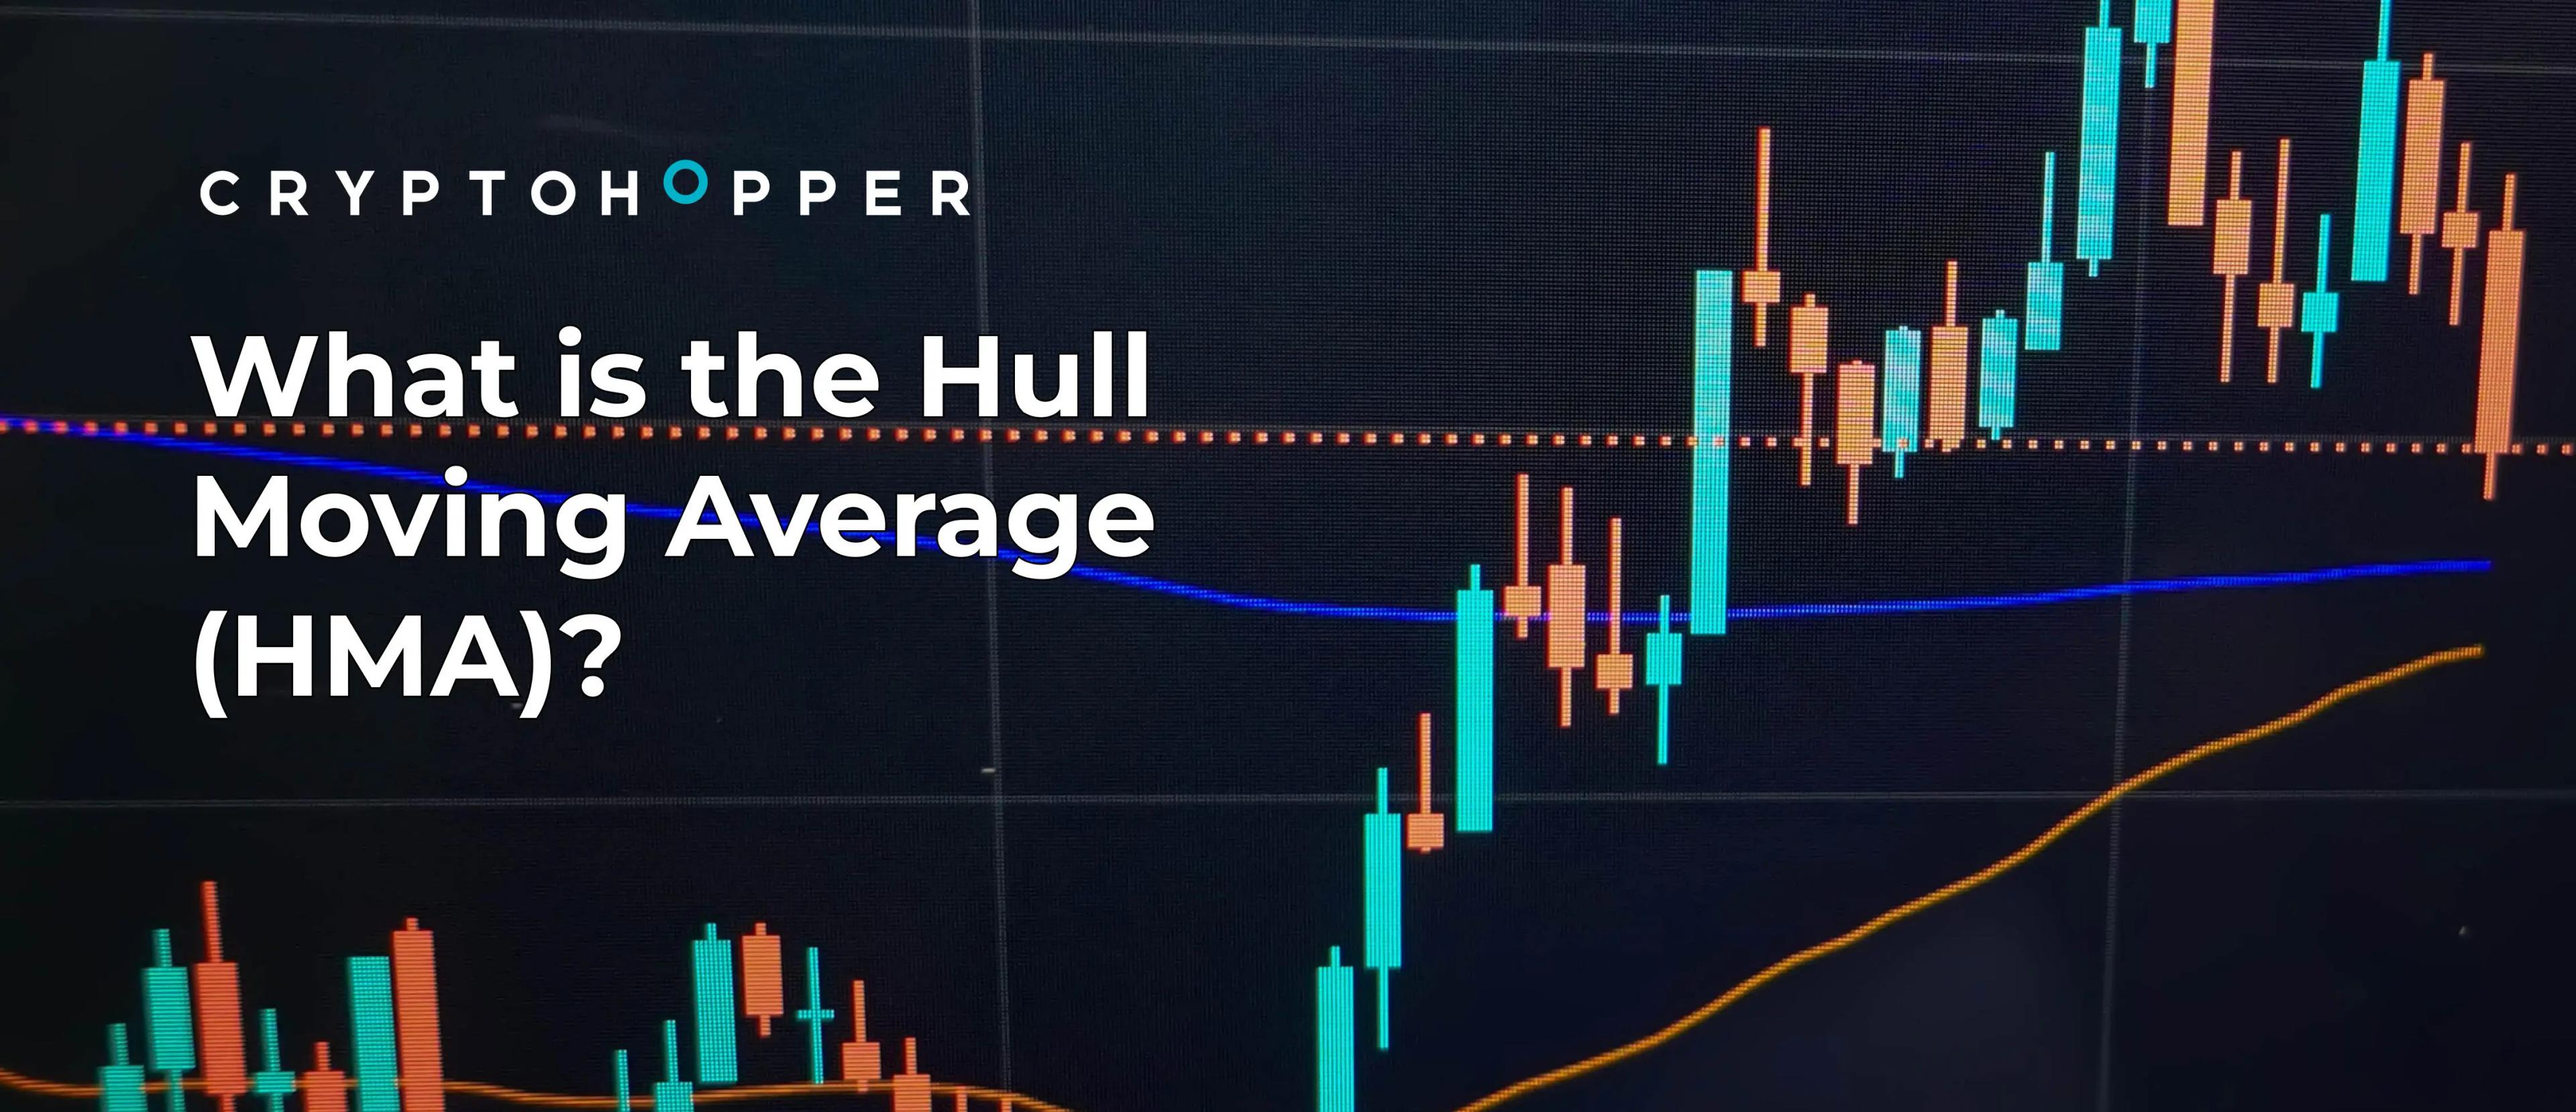 What is the Hull Moving Average (HMA)?